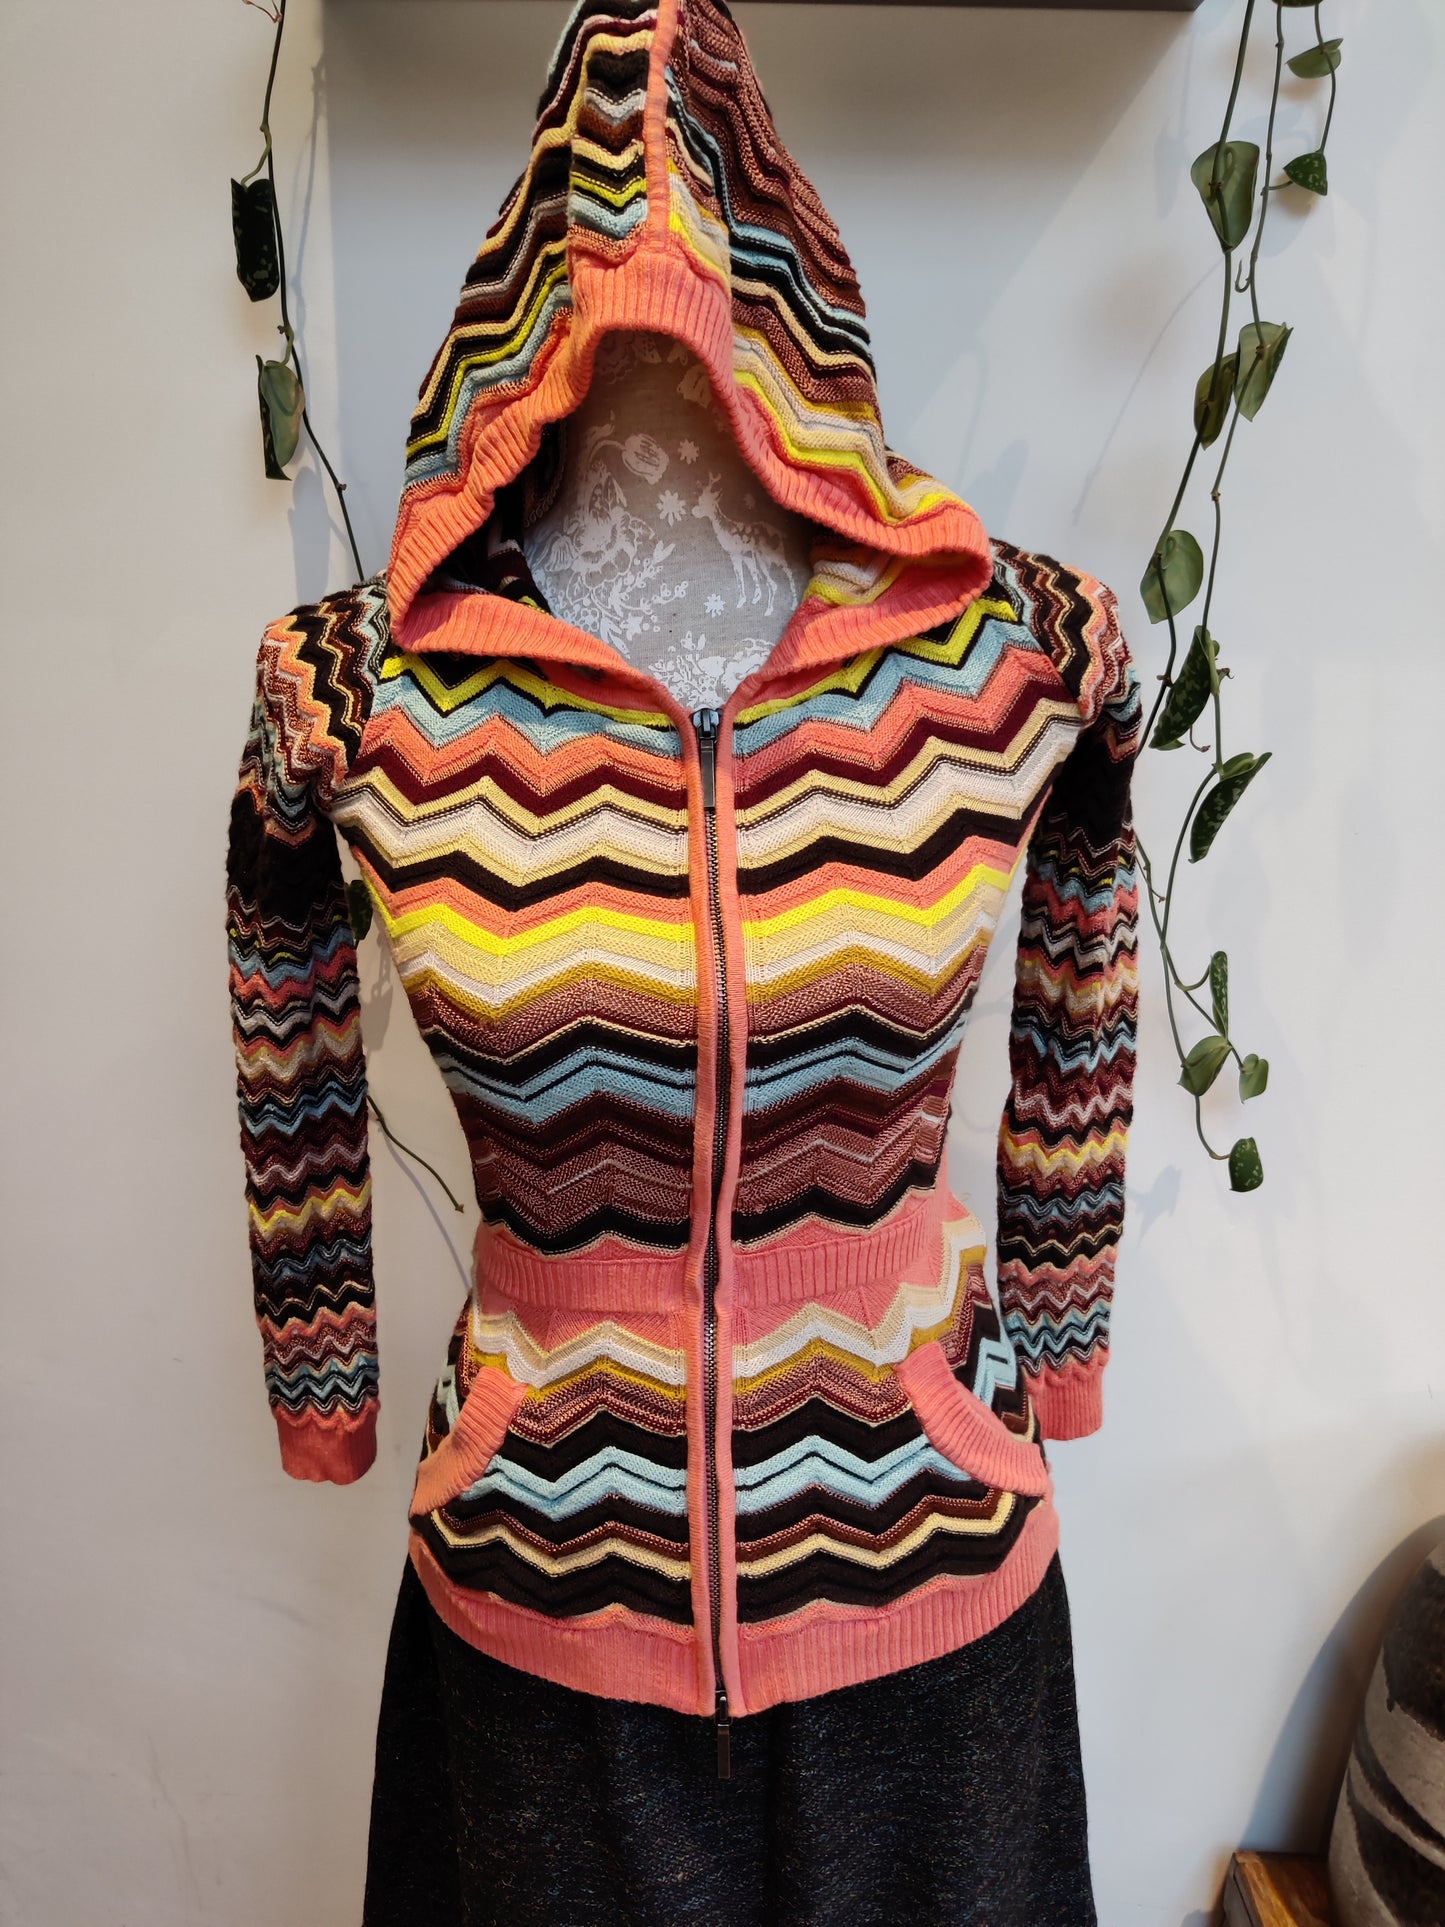 Missoni hooded top size 6-8.